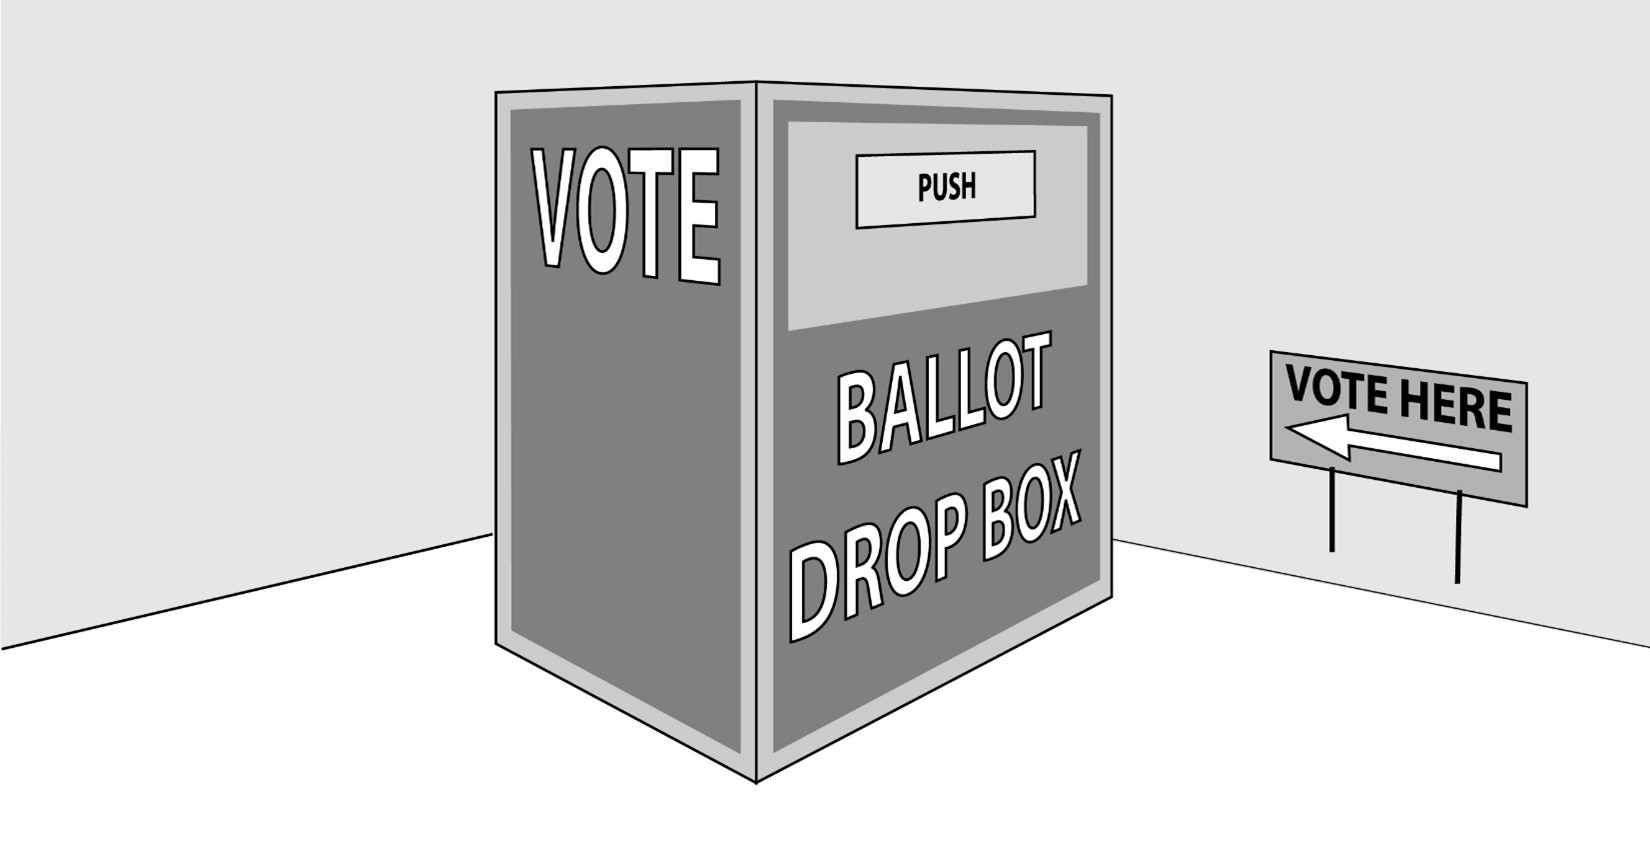 image of a ballot drop box and a "Vote Here" sign